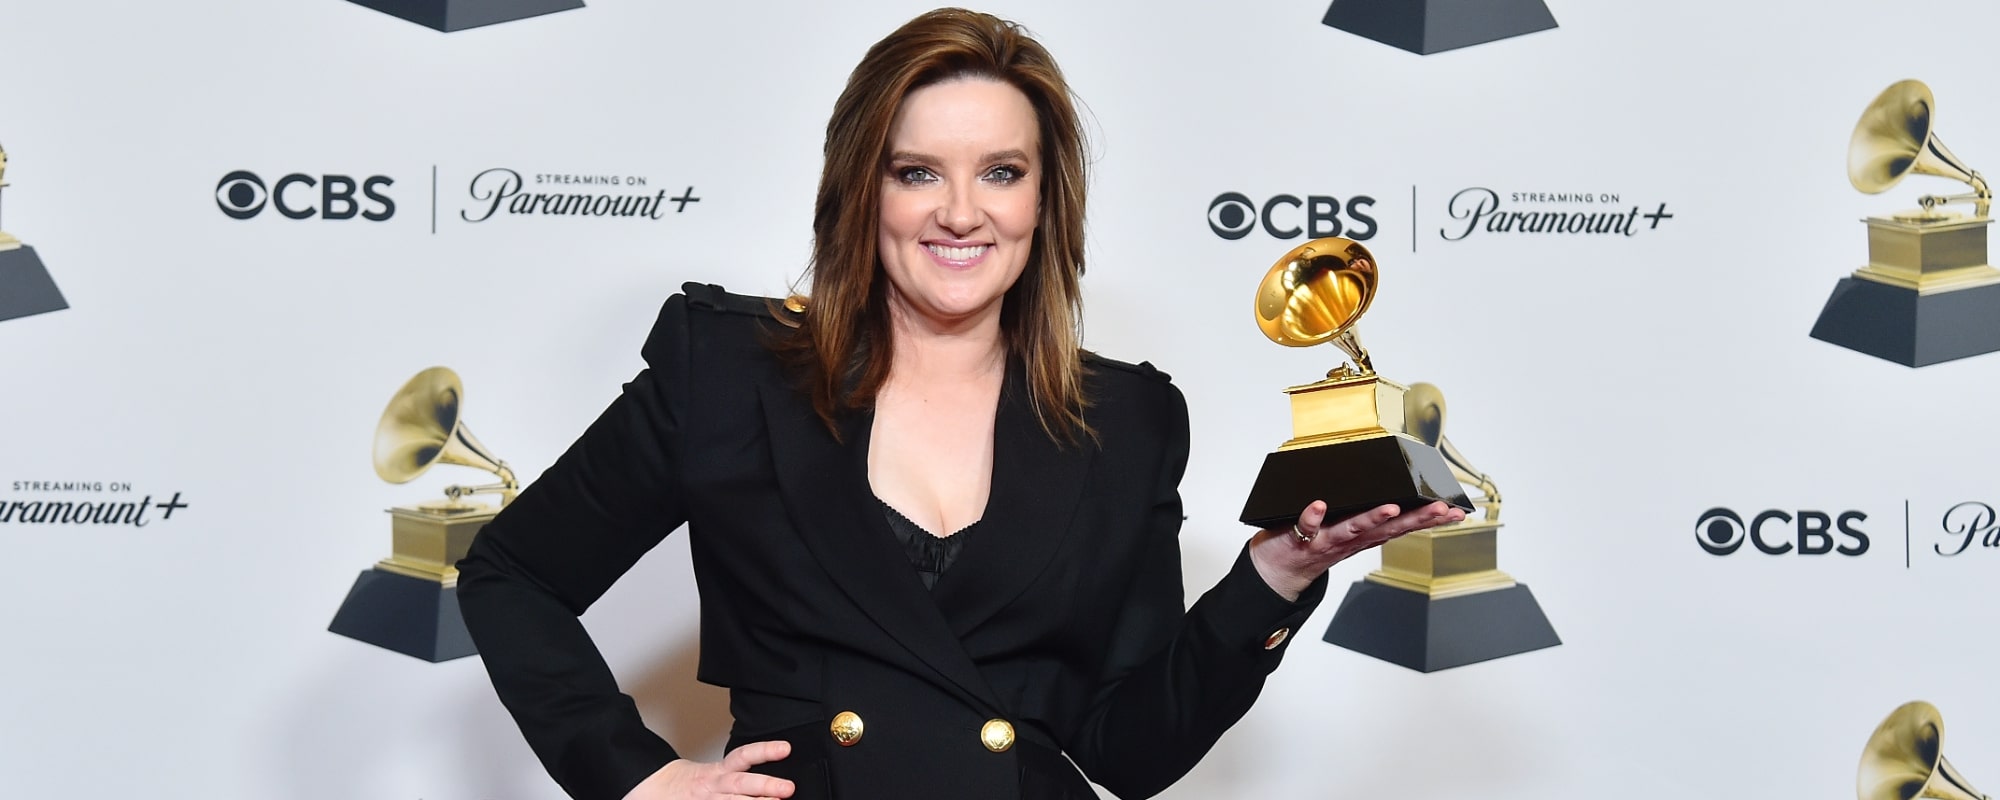 Fans Ready to “Riot” as Brandy Clark Finally Gets Over the GRAMMY Hump, Puts on Knockout Performance